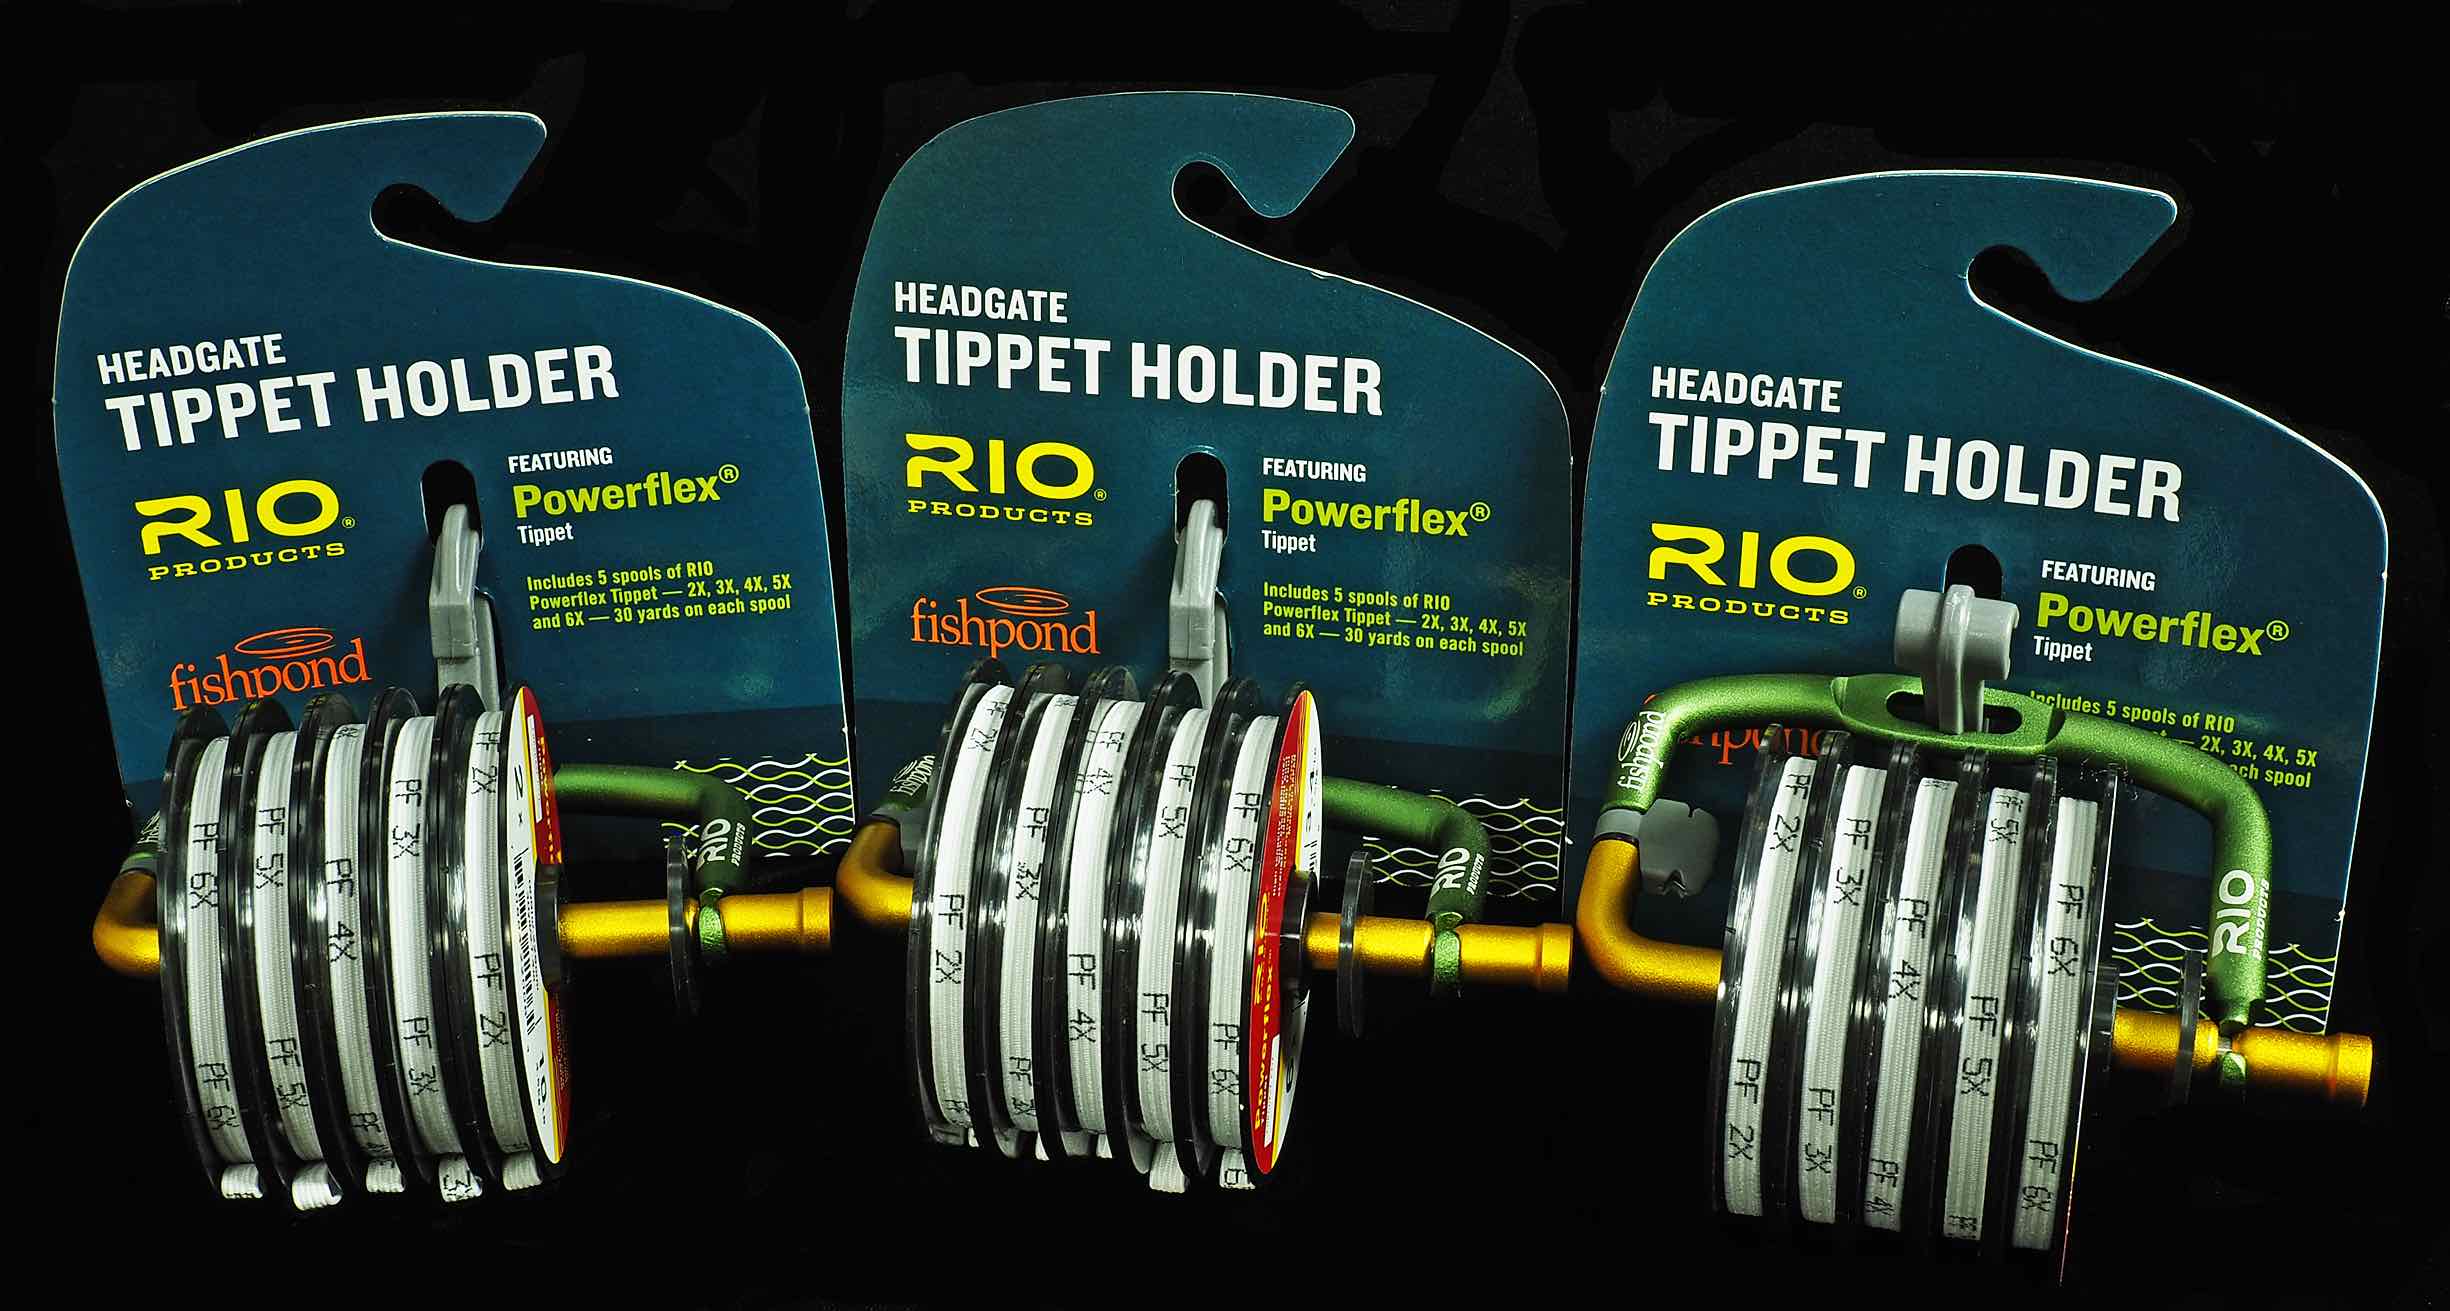 RIO Headgate Tippet Holder By Fishpond